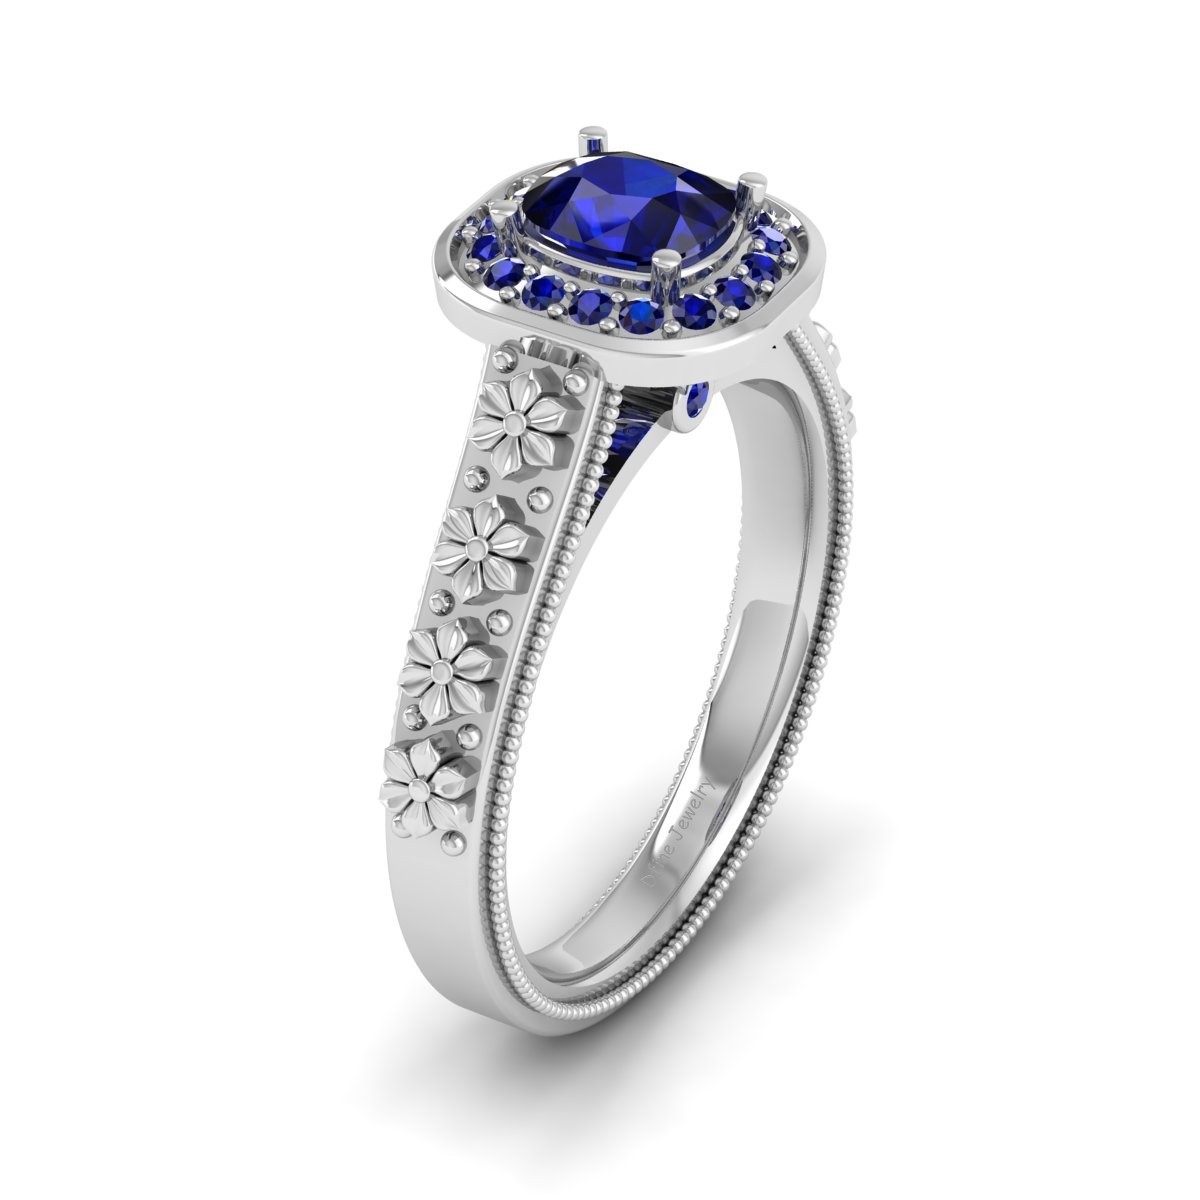 Solid 925 Sterling Silver Cushion Cut Blue Sapphire Halo Engagement Ring Jewelry